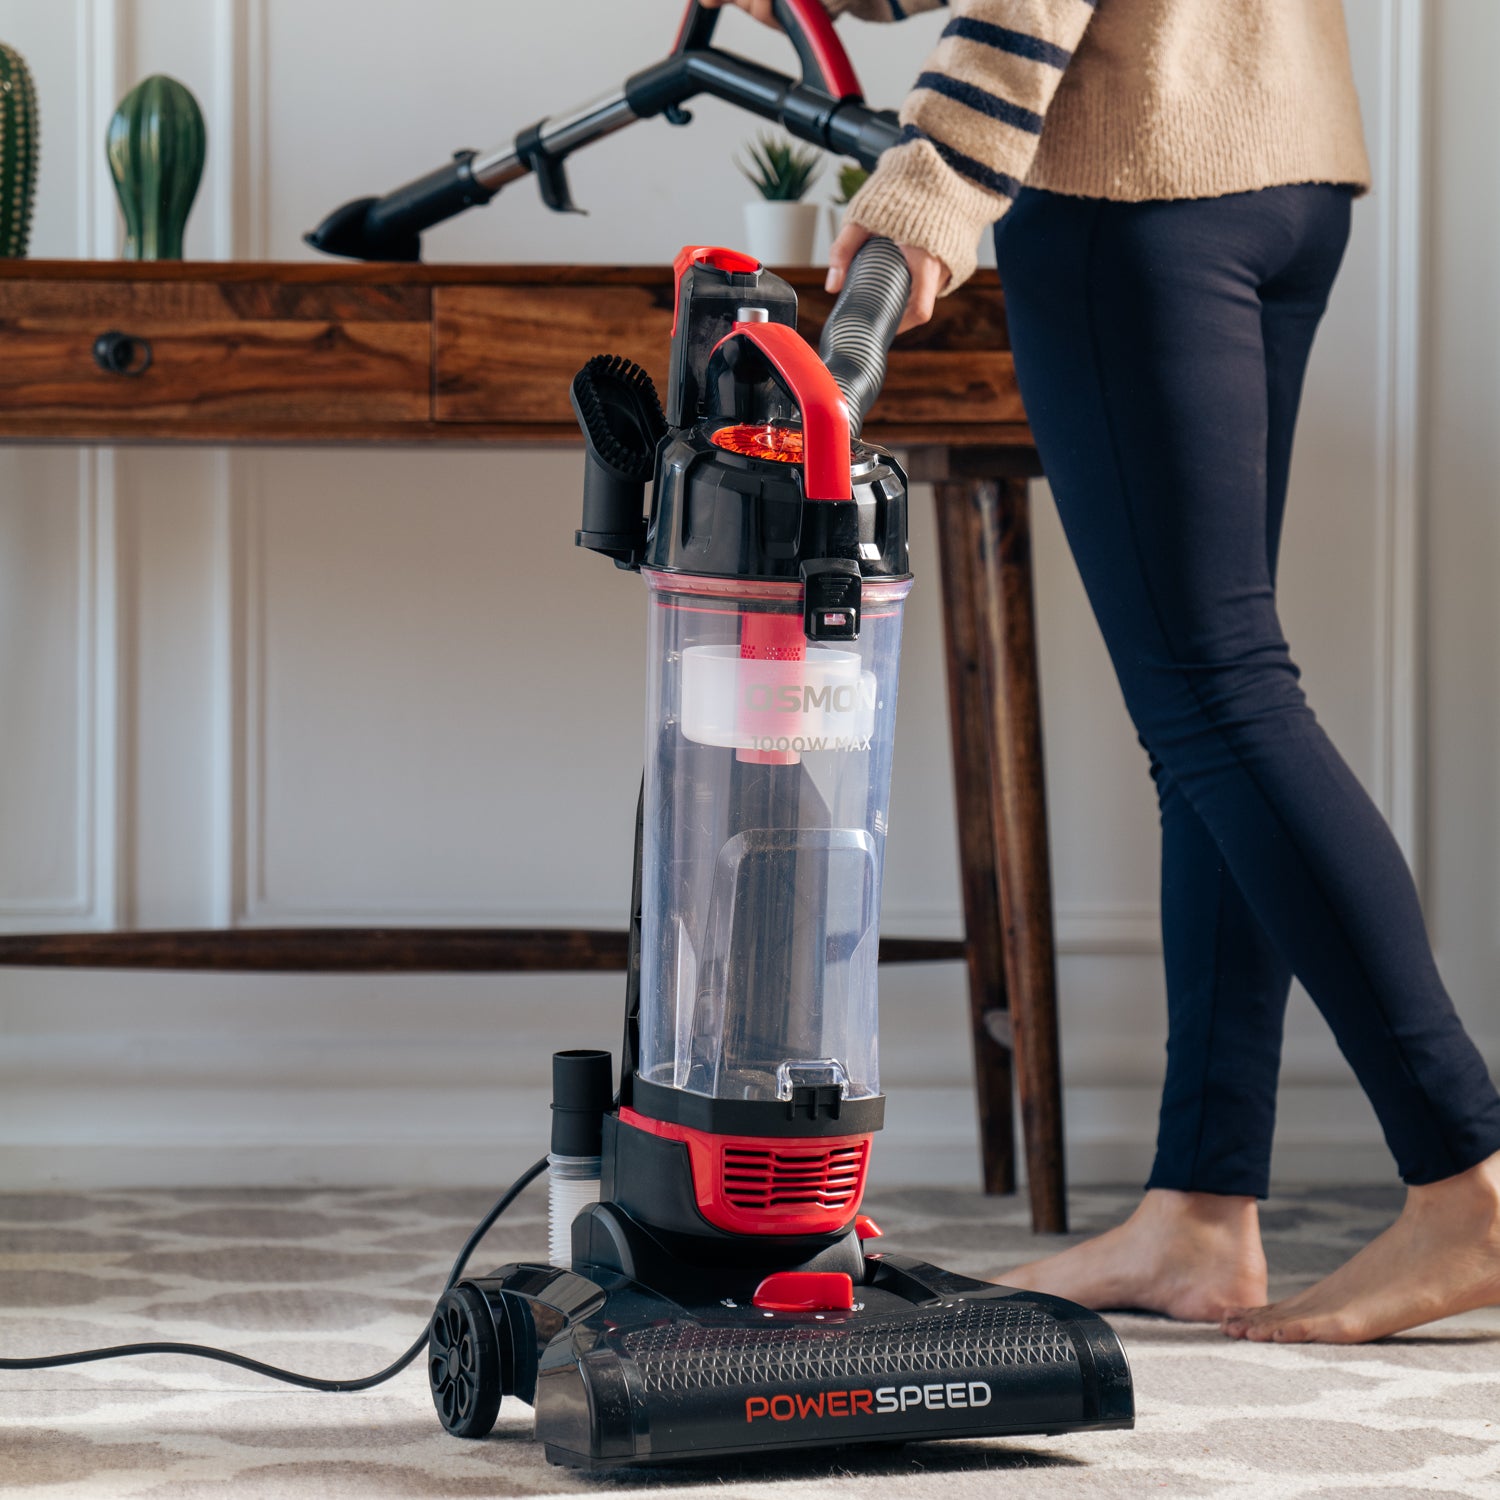 A sleek Red and black vacuum cleaner, the OS 26UBL, stands tall against a backdrop of a clean and tidy living room.